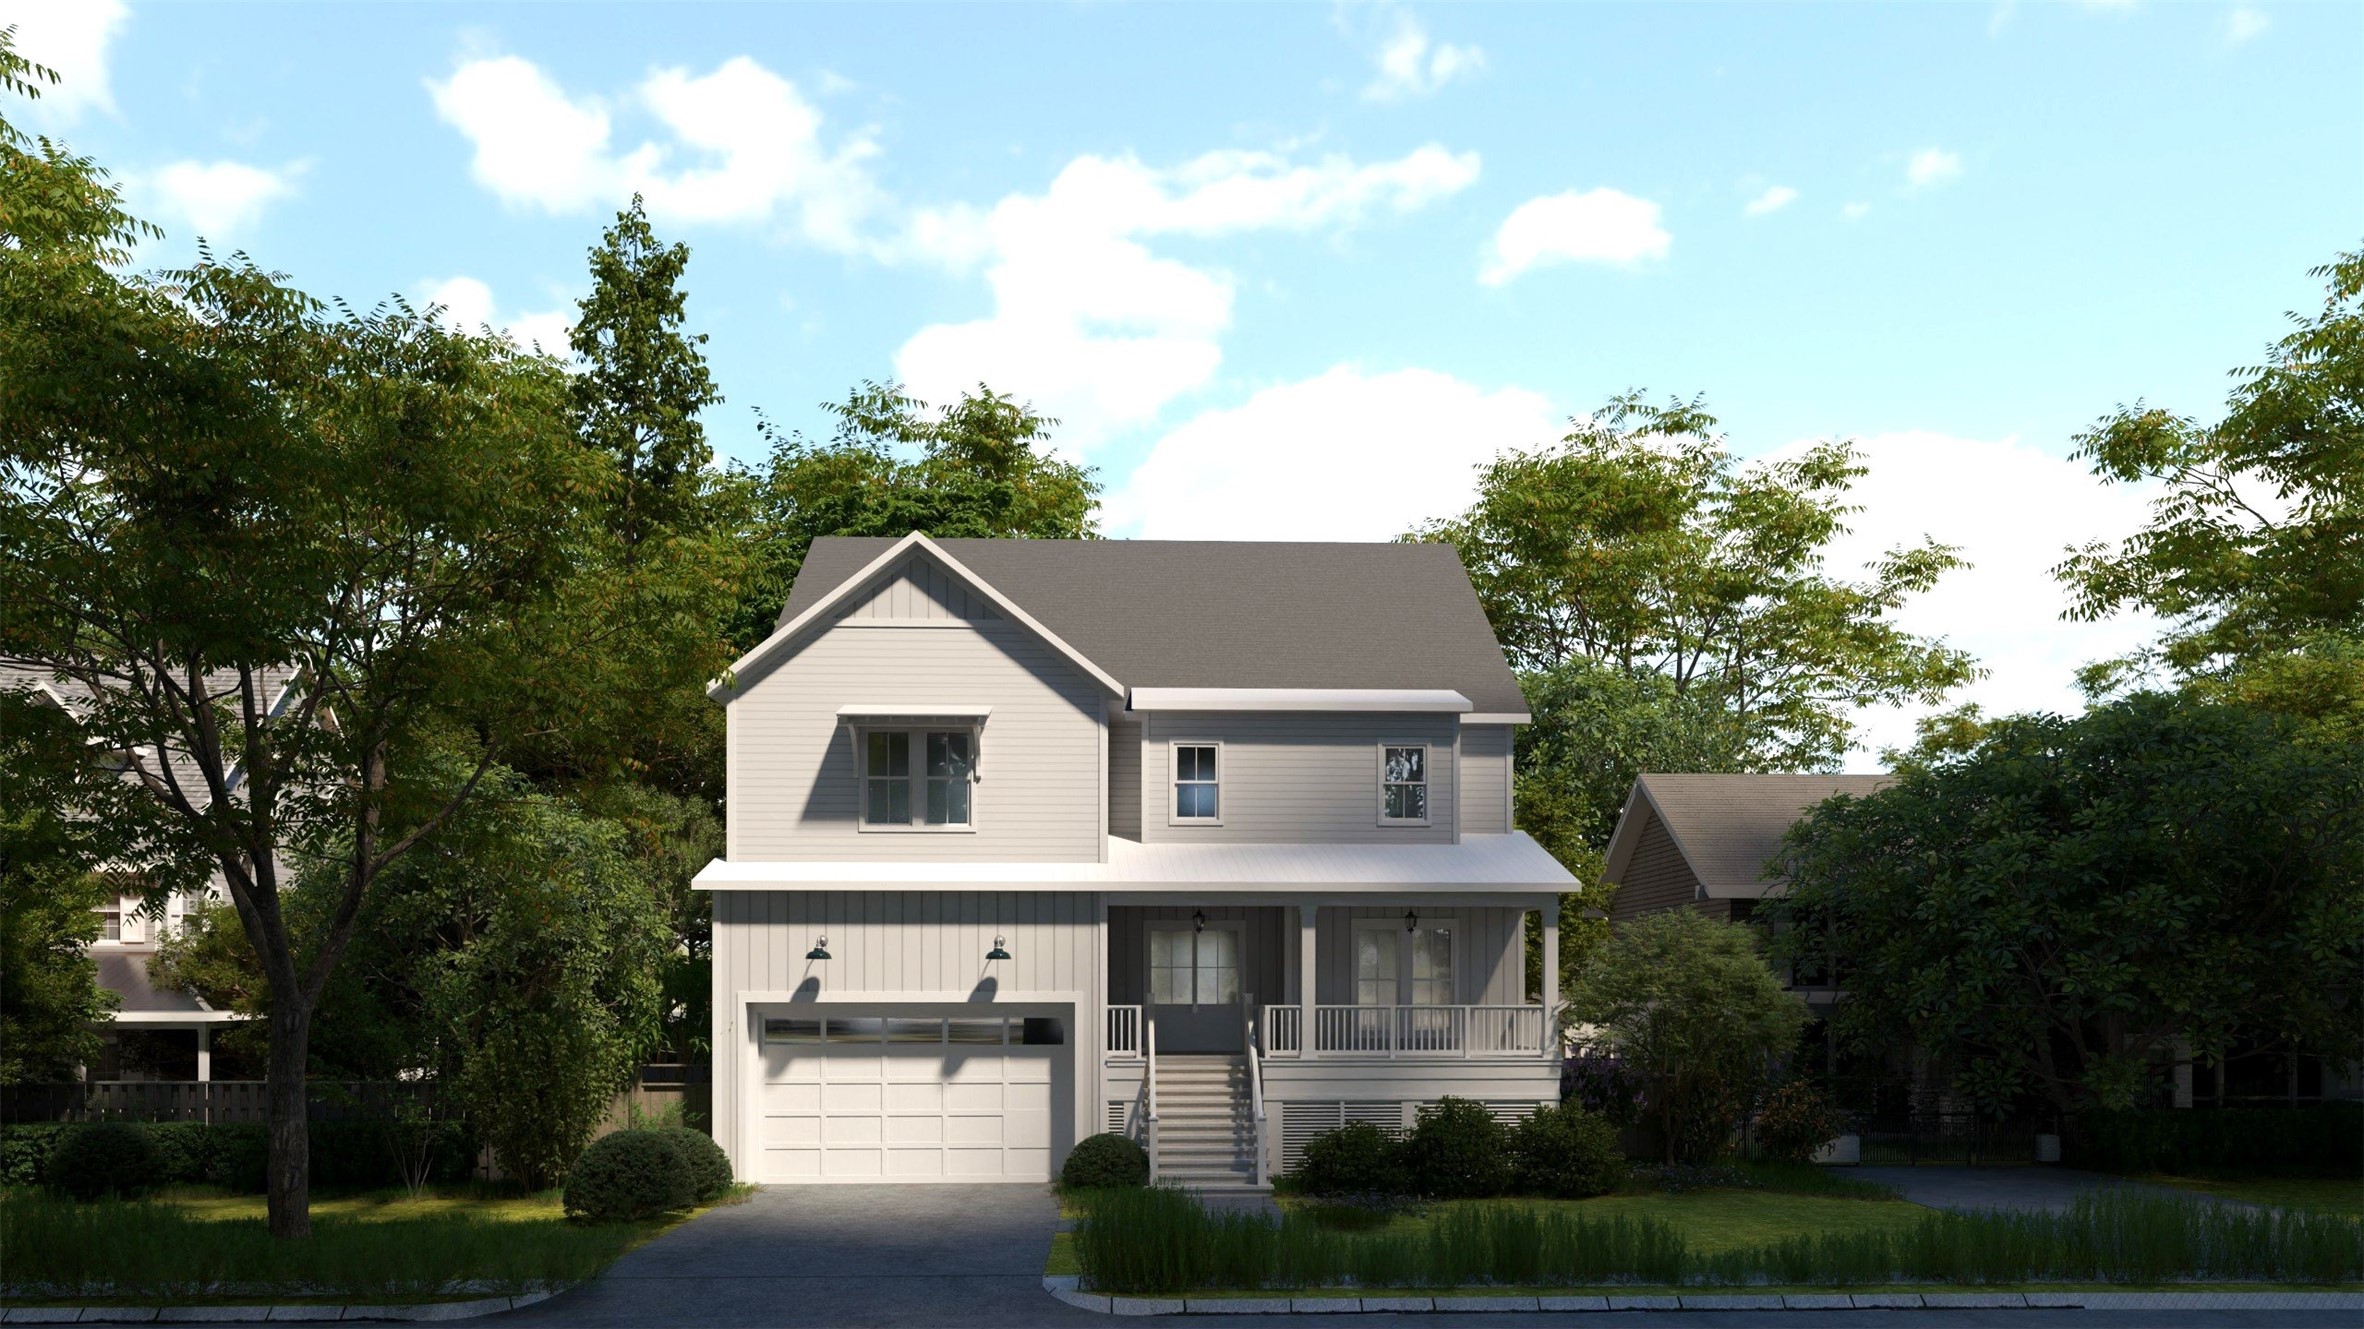 1009 Shelterwood. Rendering of home's exterior. More pictures forthcoming as construction progresses.